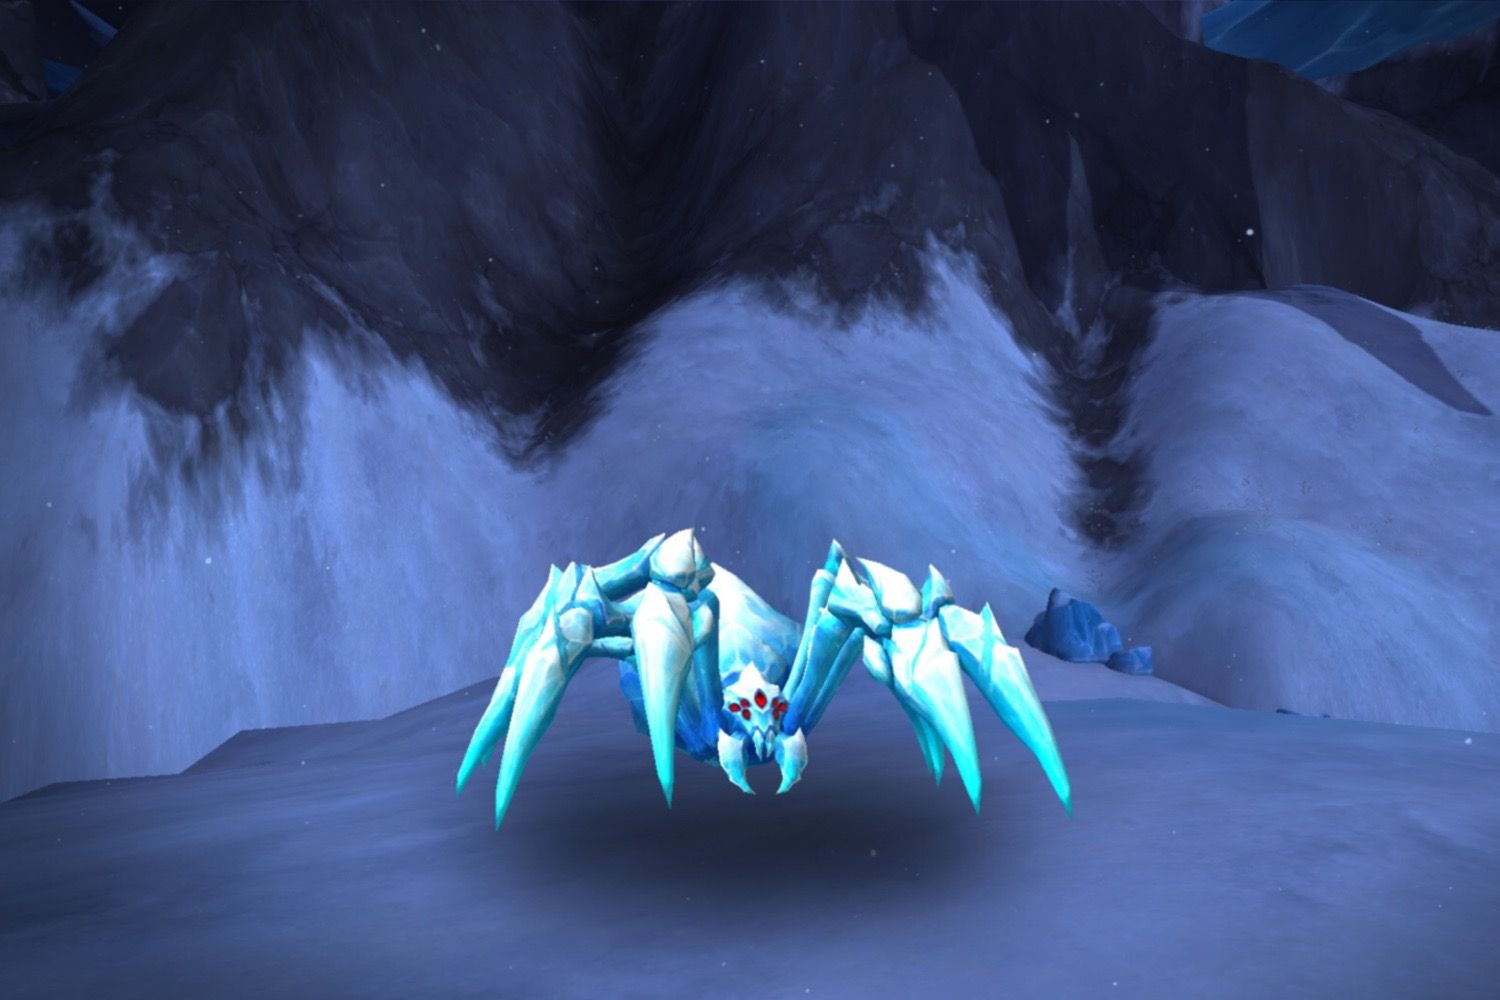 The ice spider battle pet, Shiverweb Broodling.